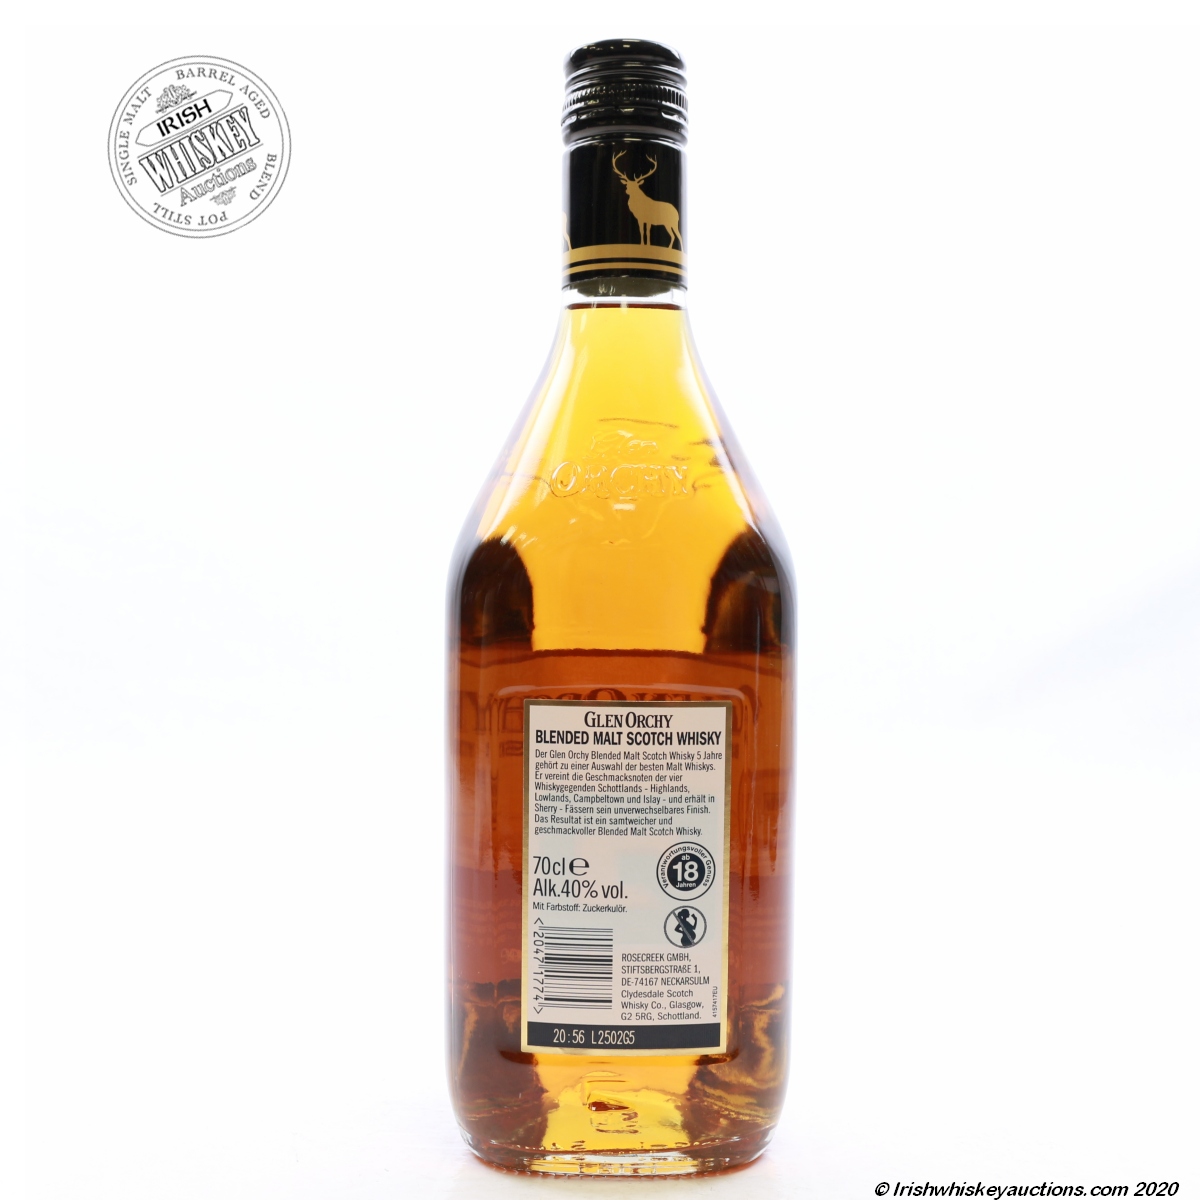 Irish Whiskey Auctions | Blended Scotch Glen Old Malt 5 Orchy Year Whisky